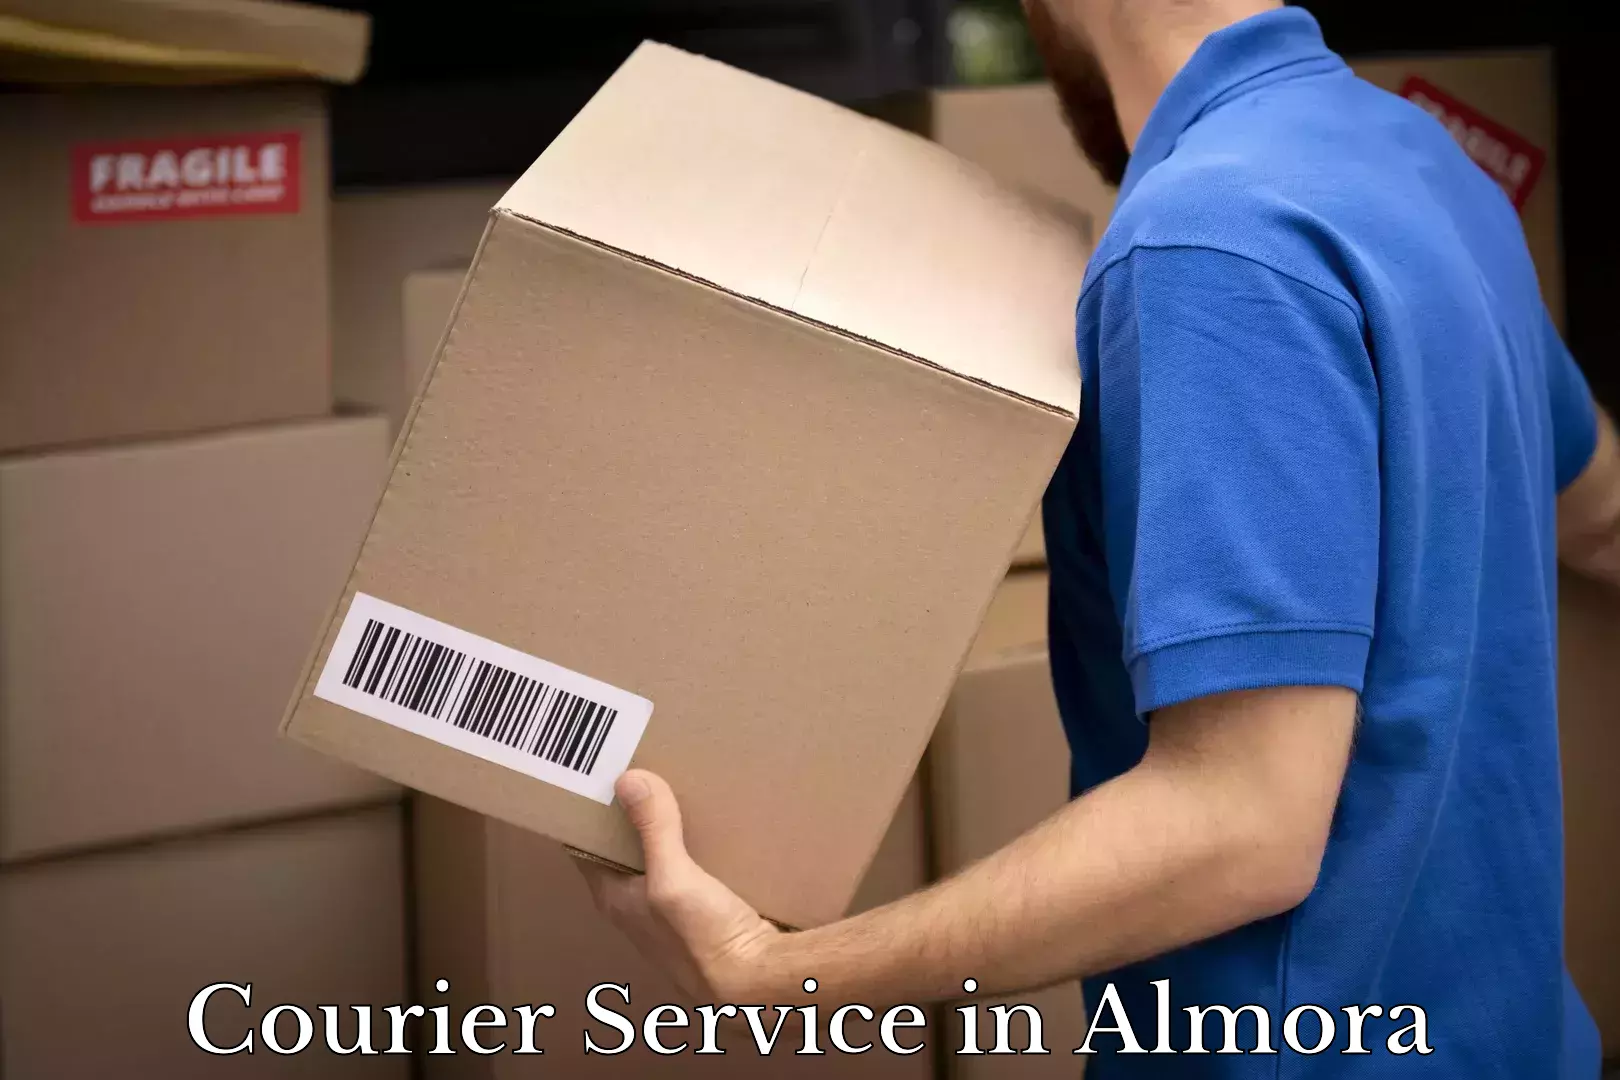 24-hour courier service in Almora